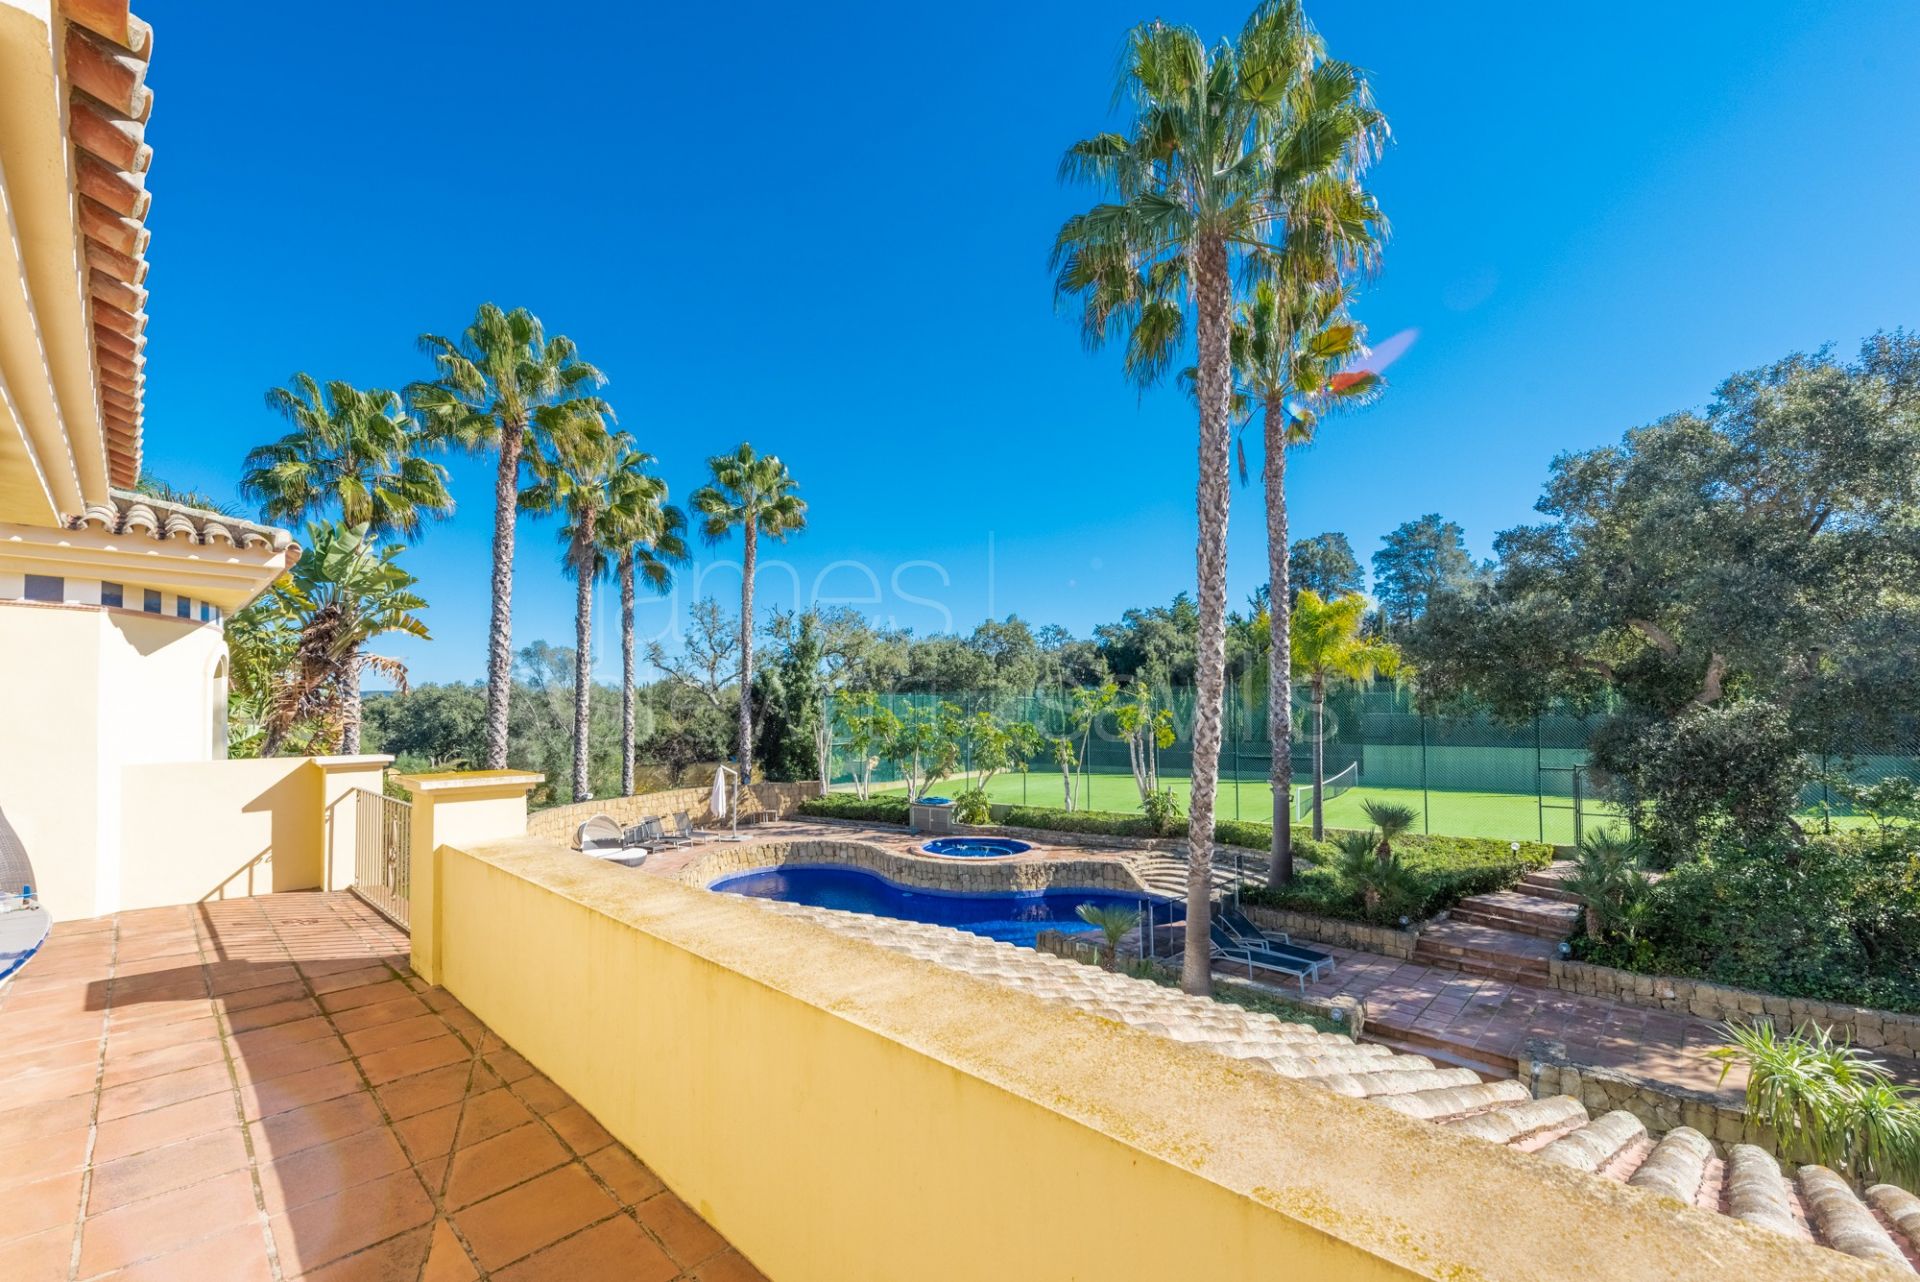 Spacious villa on over 4400m2 plot with tennis court frontline to Real Valderrama golf course